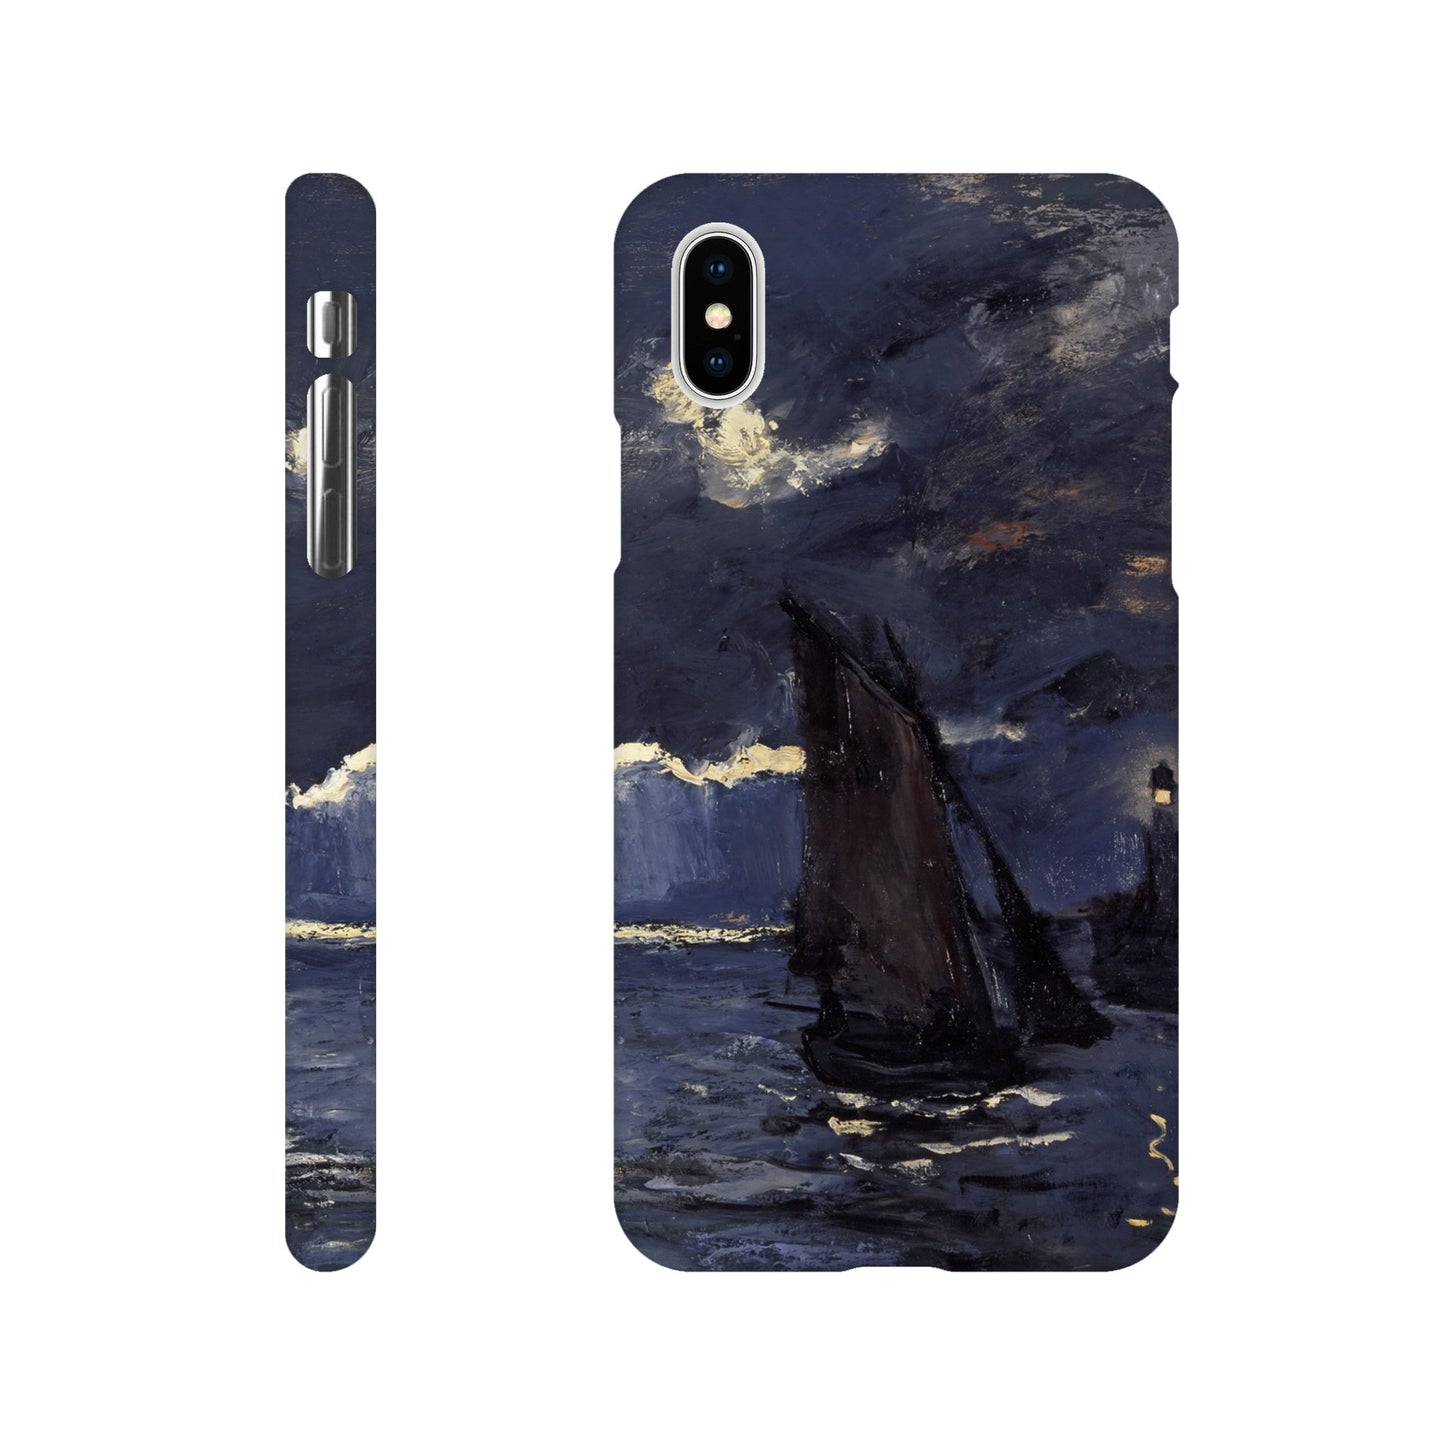 CLAUDE MONET - A SEASCAPE, SHIPPING BY MOONLIGHT - SLIM iPHONE CASE